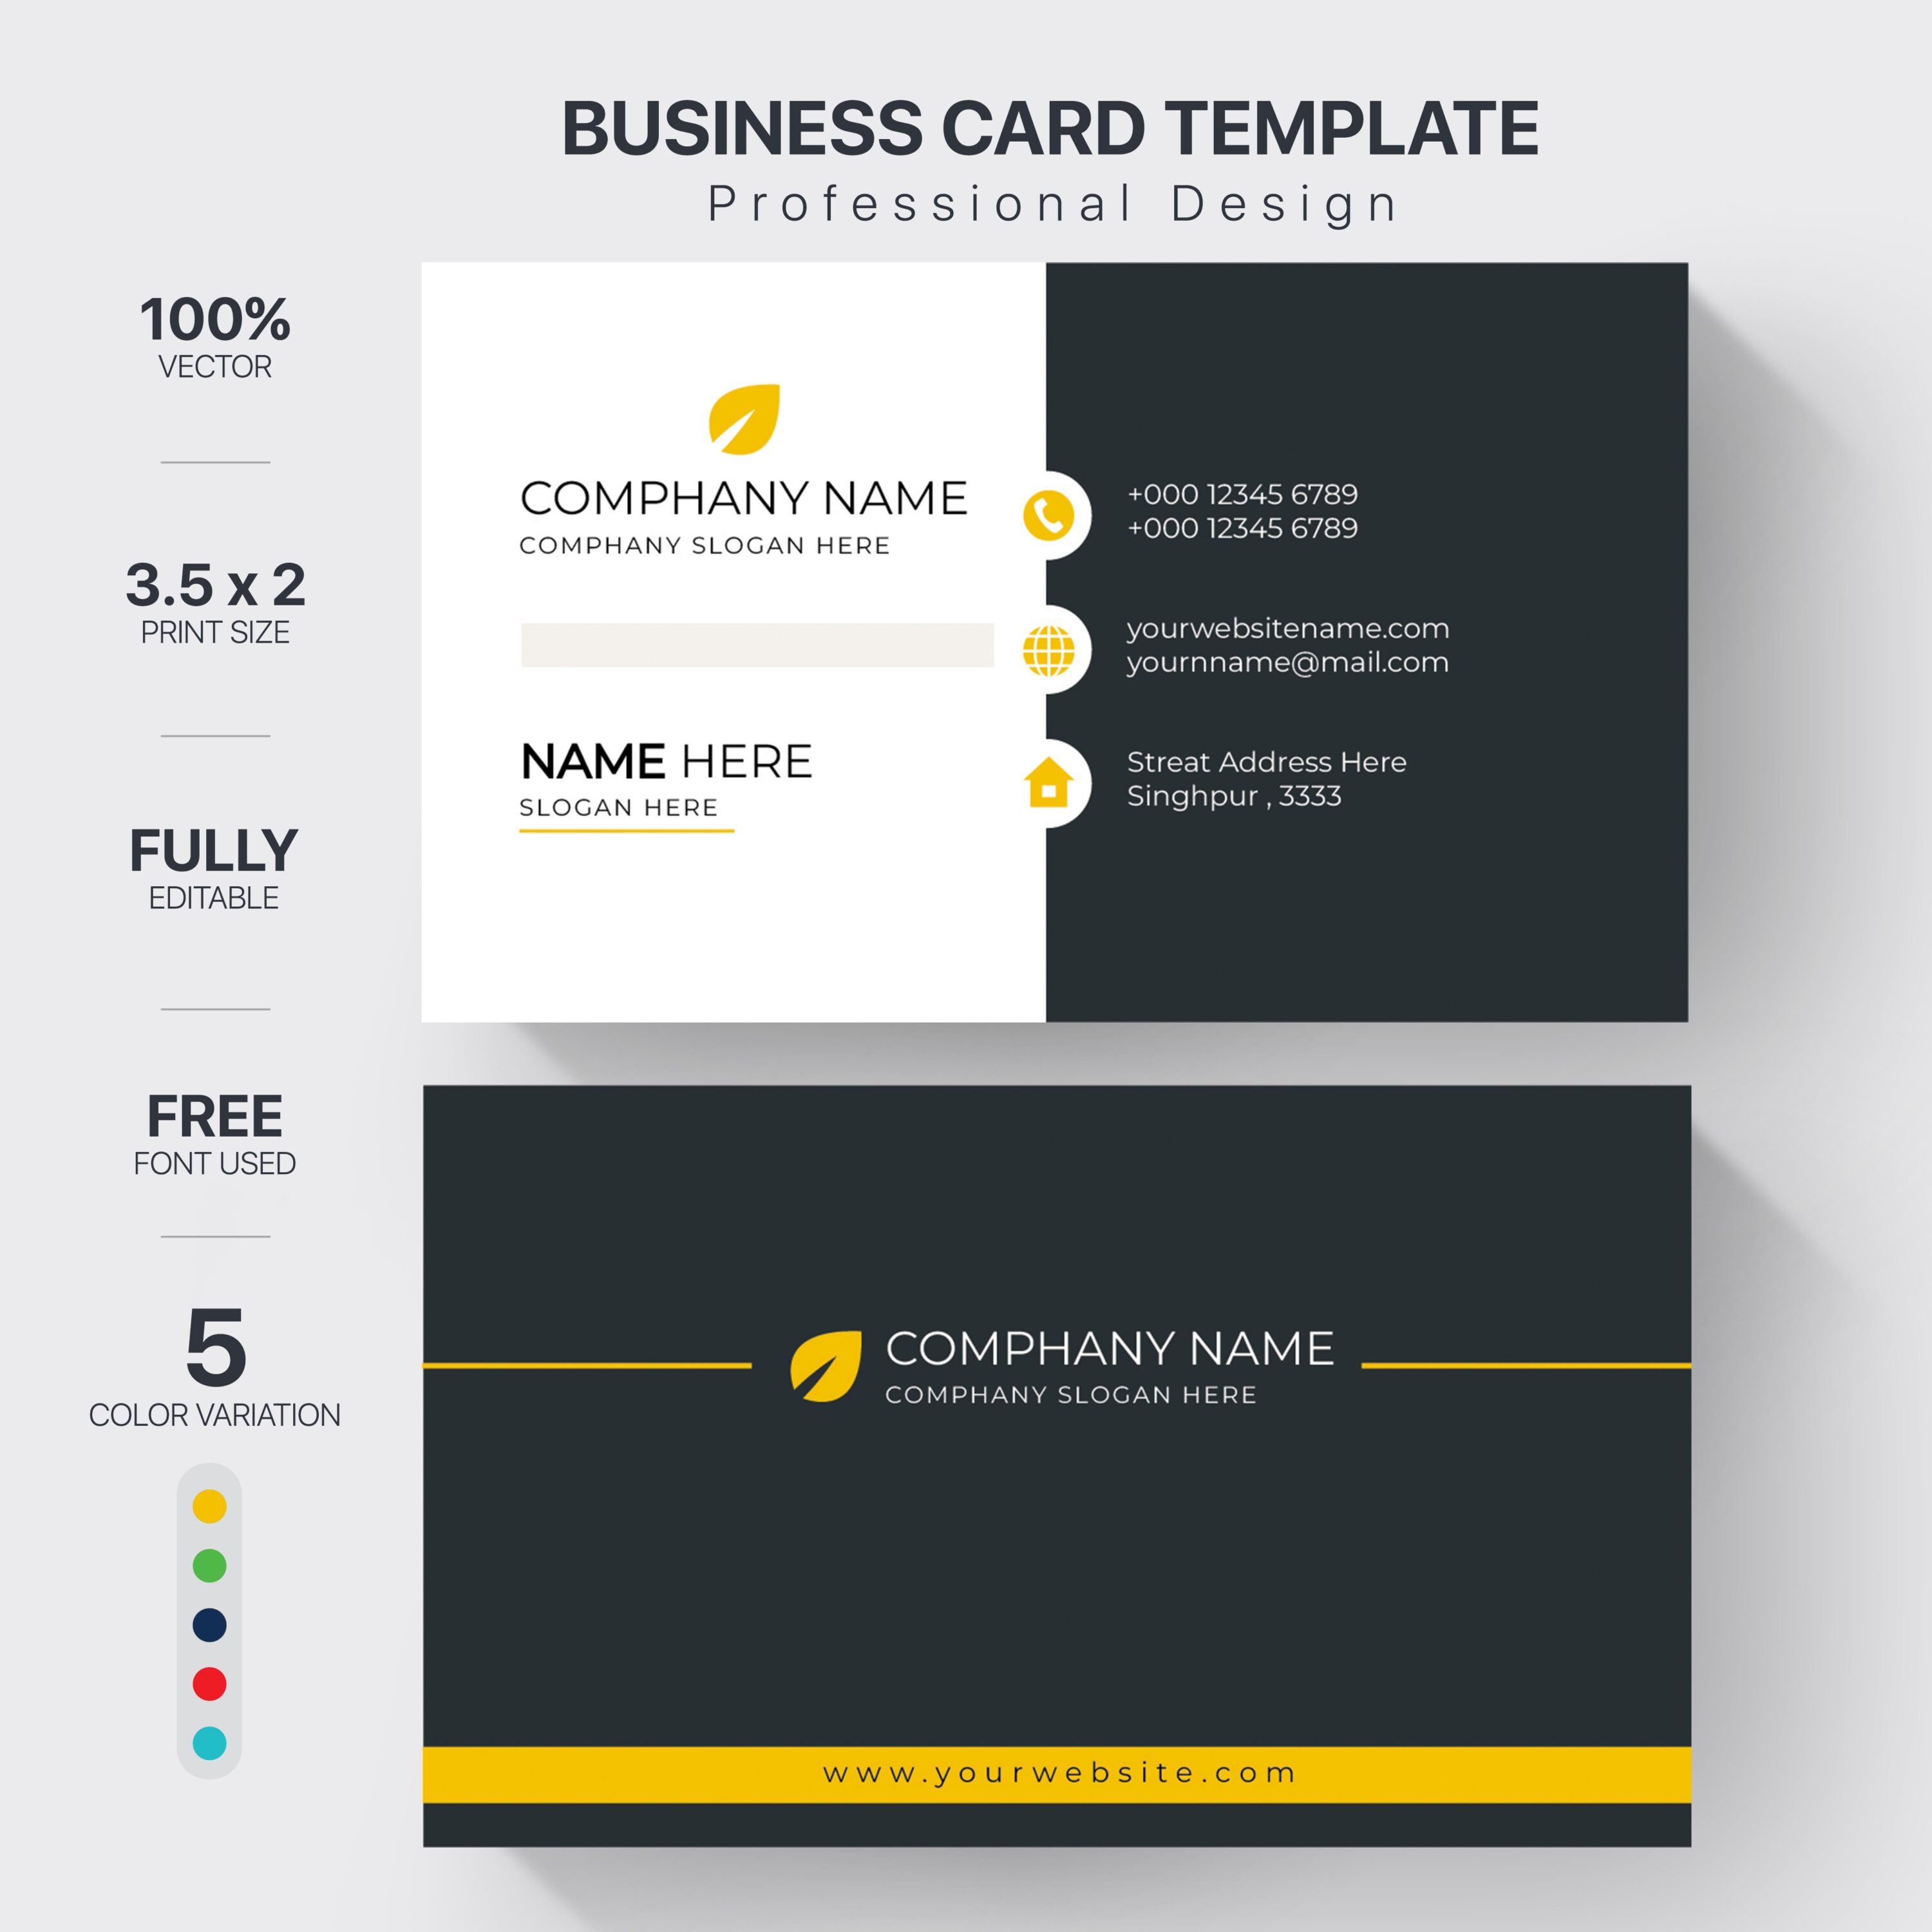 Gorgeous image double sided business card template in black and white and yellow.